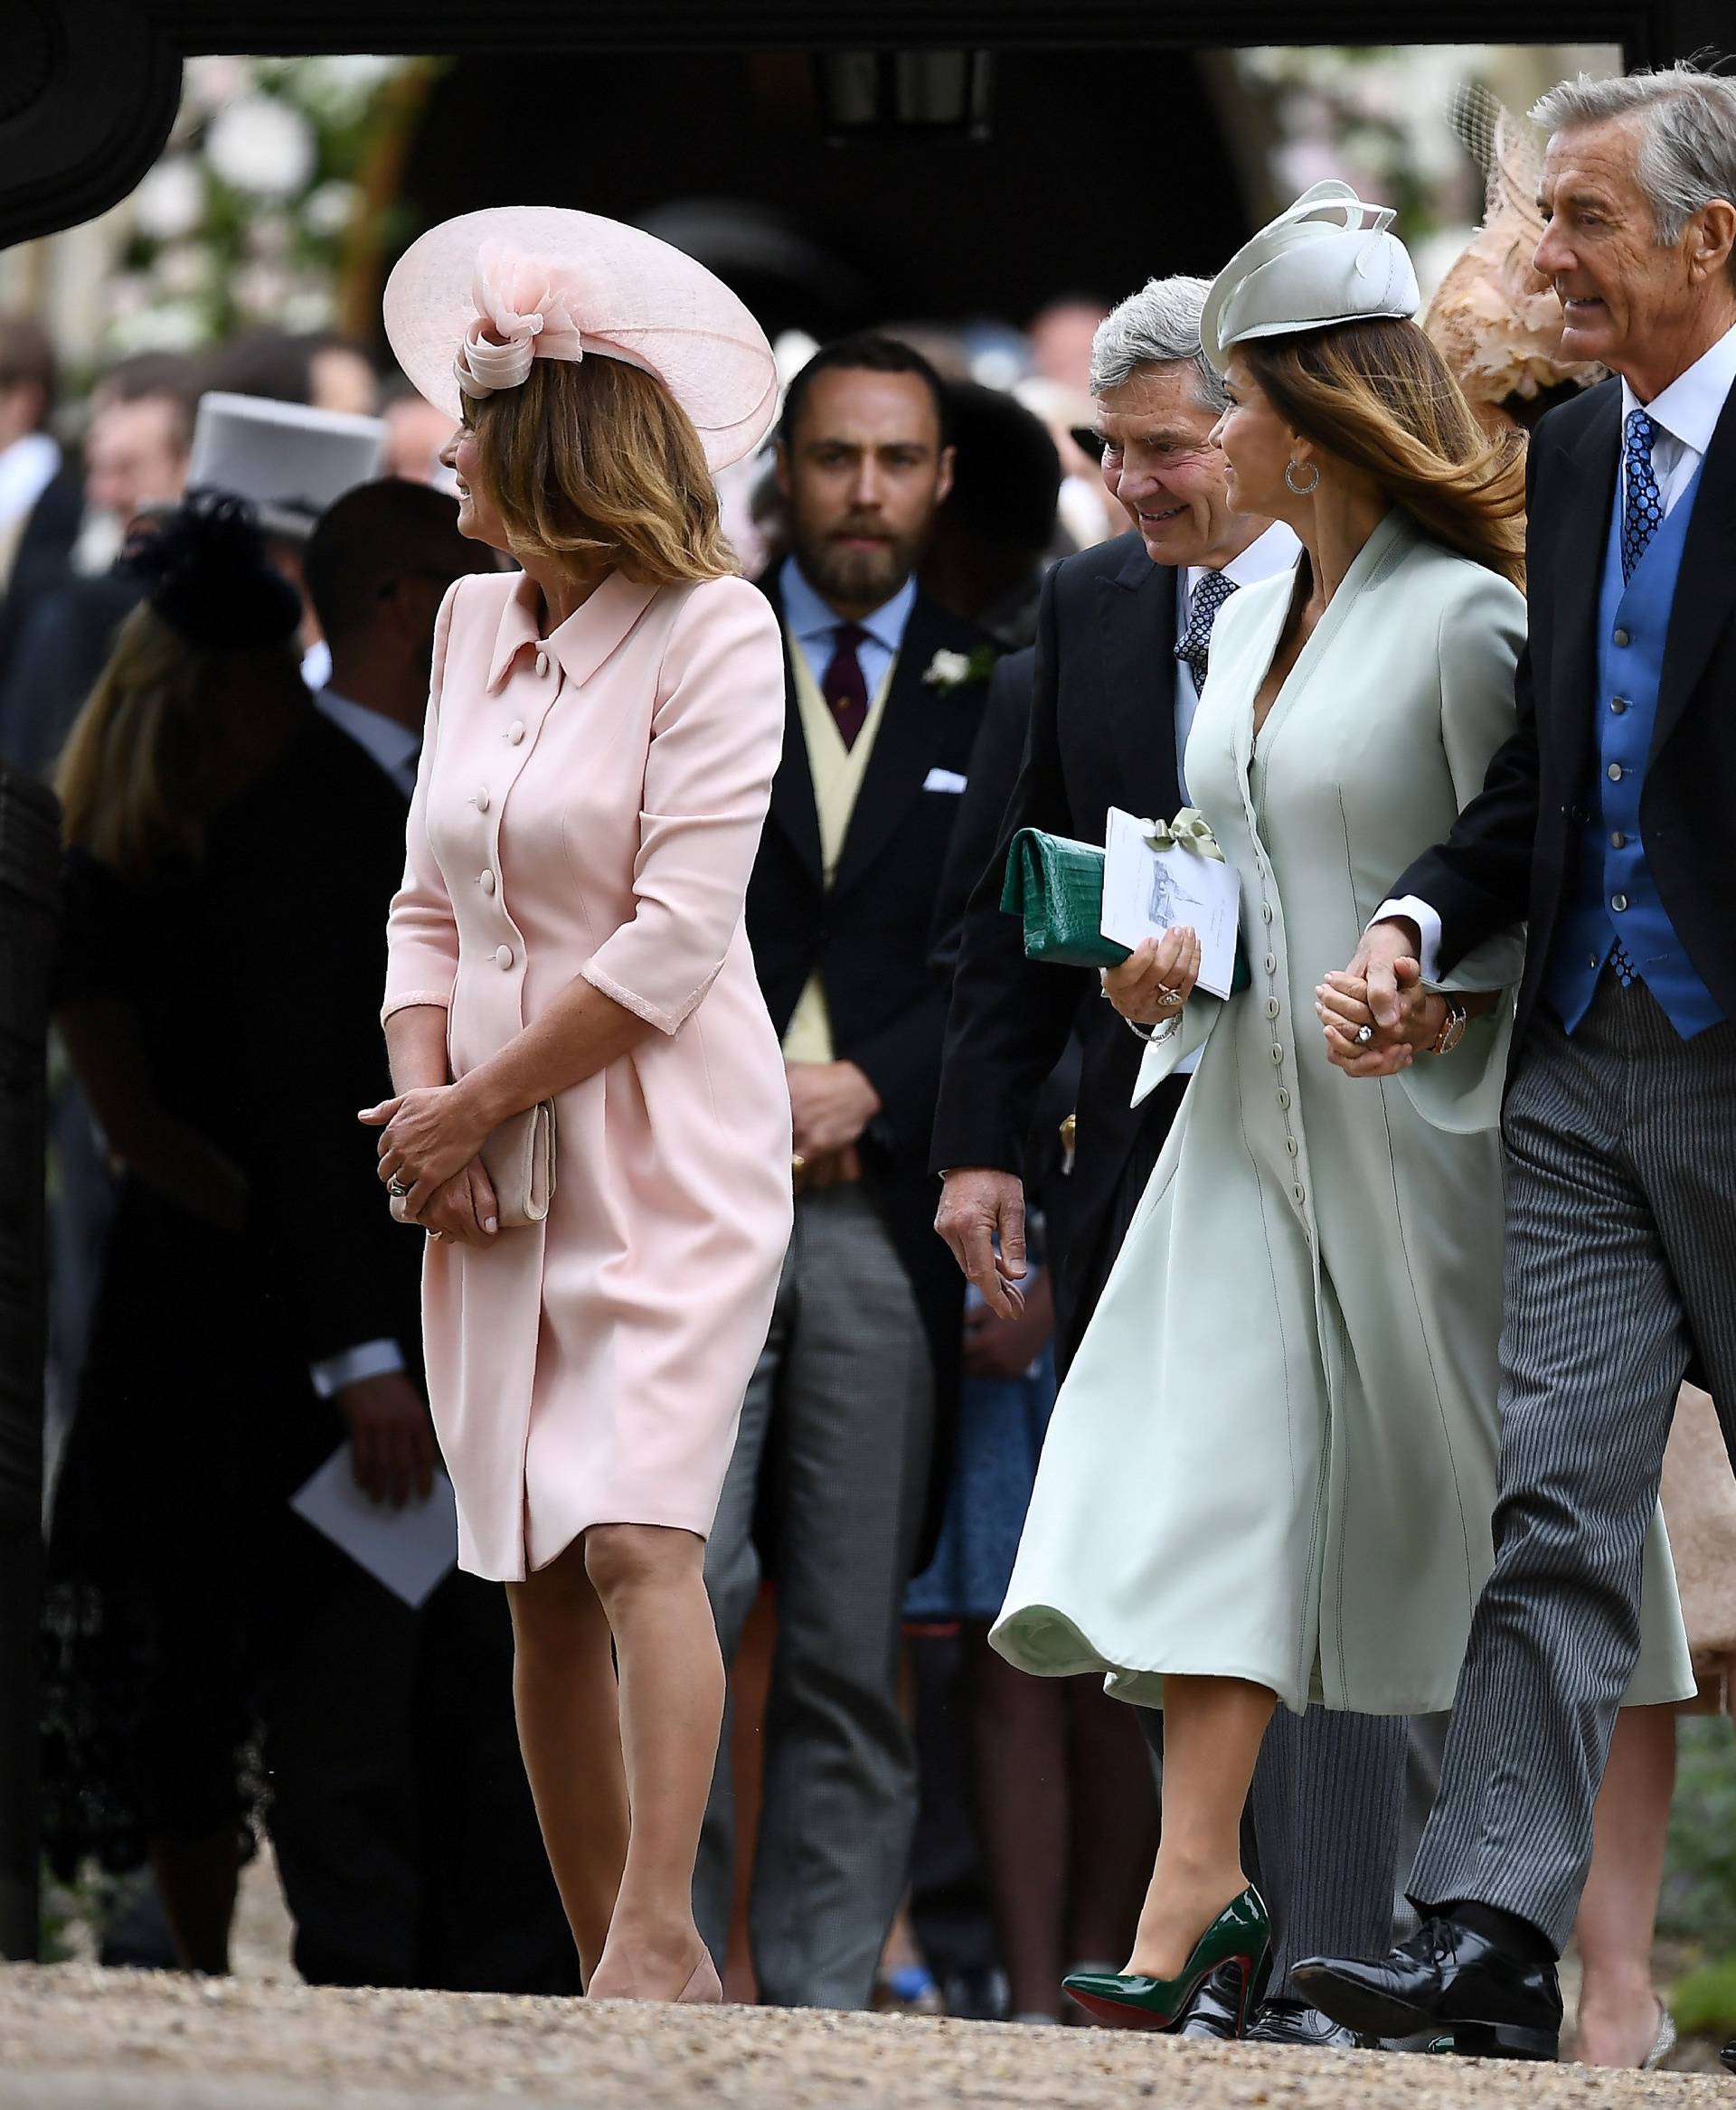 FILE PHOTO: FILE PHOTO: Carole Middleton and her husband Michael Middleton leave after attending the wedding of their daughter Pippa Middleton to James Matthews at St Mark's Church in Englefield